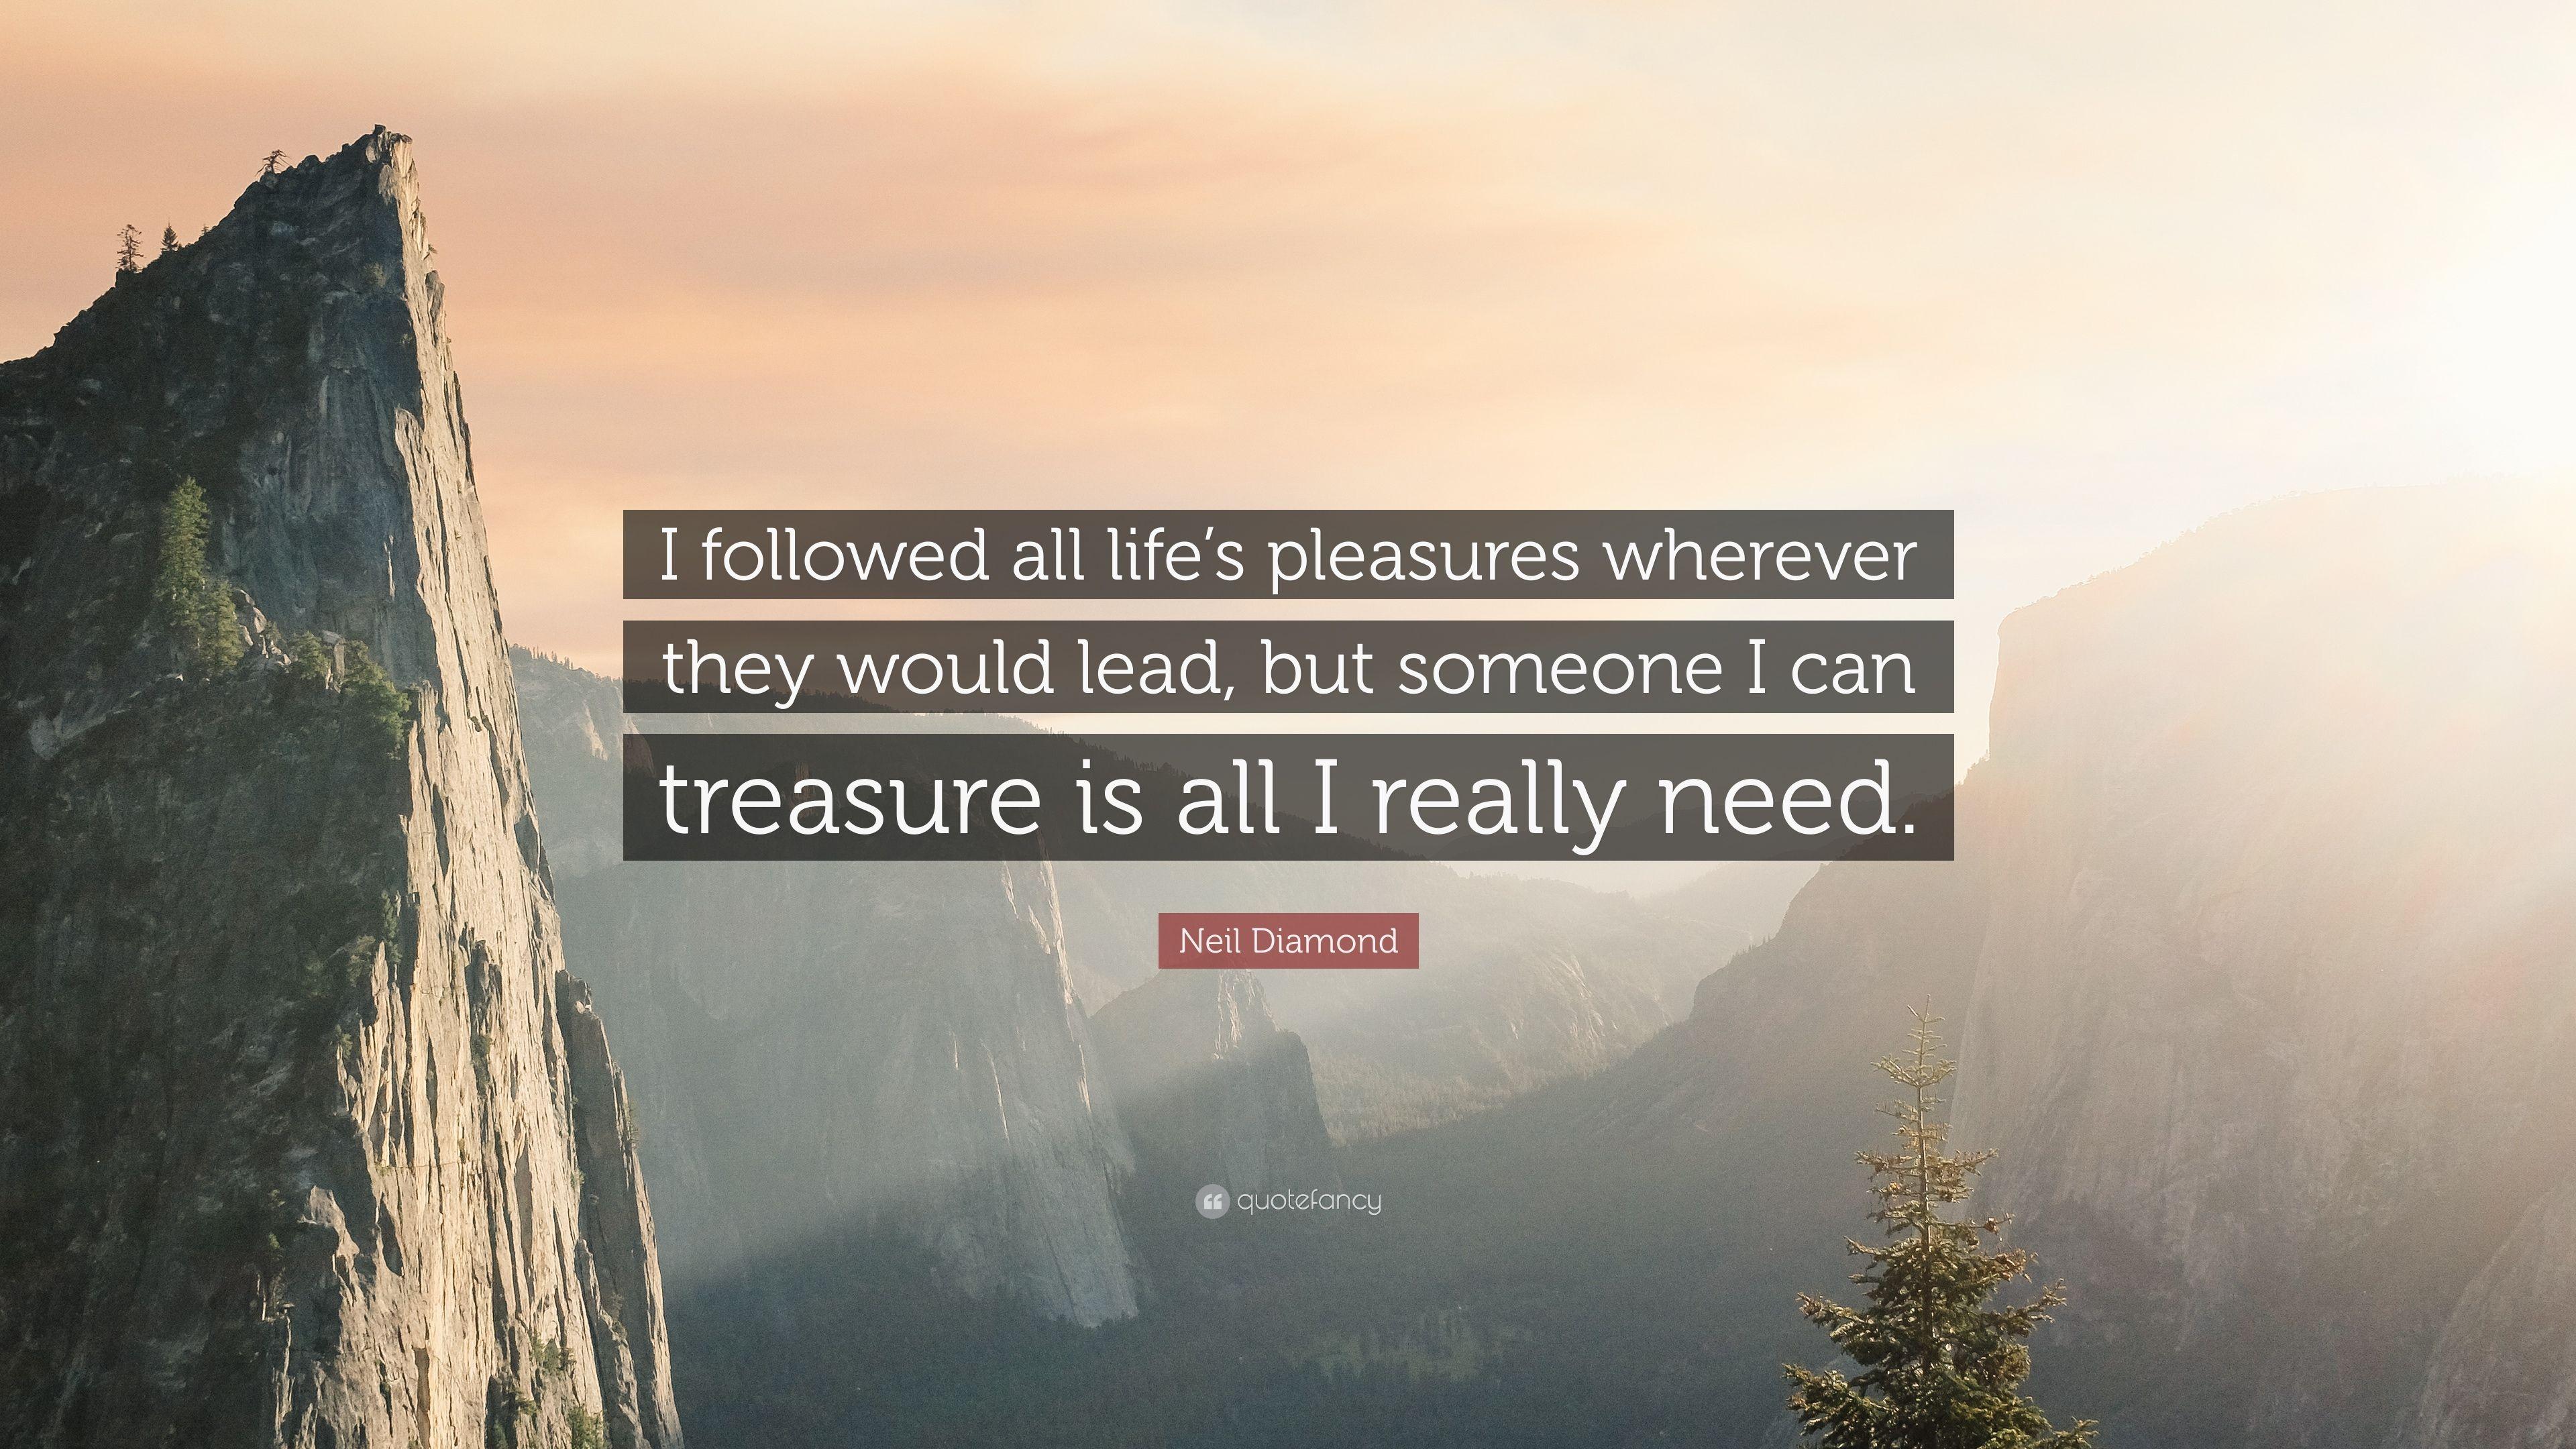 Neil Diamond Quote: “I followed all life's pleasures wherever they